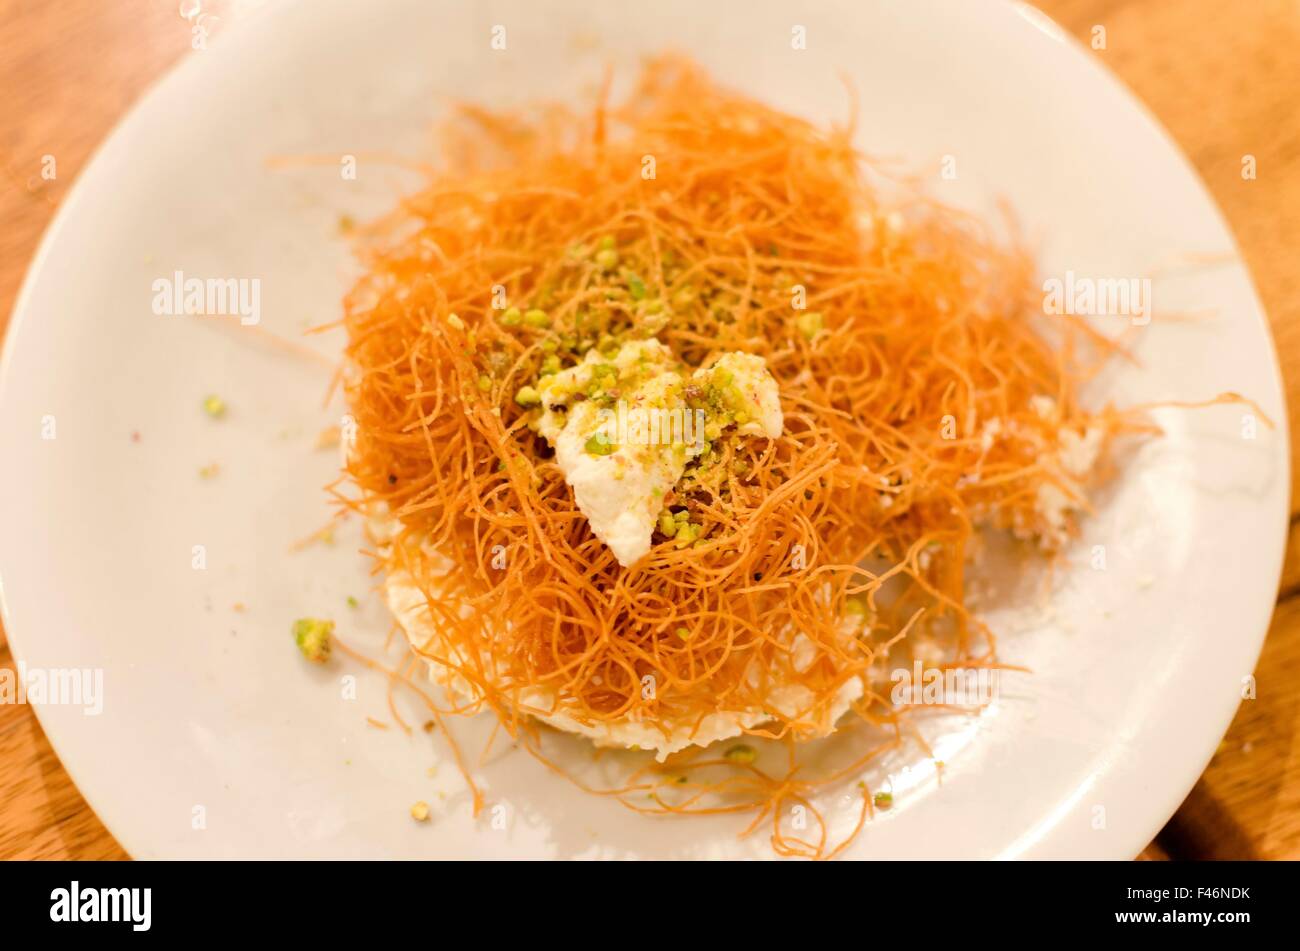 A delicious lebanese dessert made with vermicelli and ashta cream as well as syrop. Typical dessert served after food in Lebanon Stock Photo